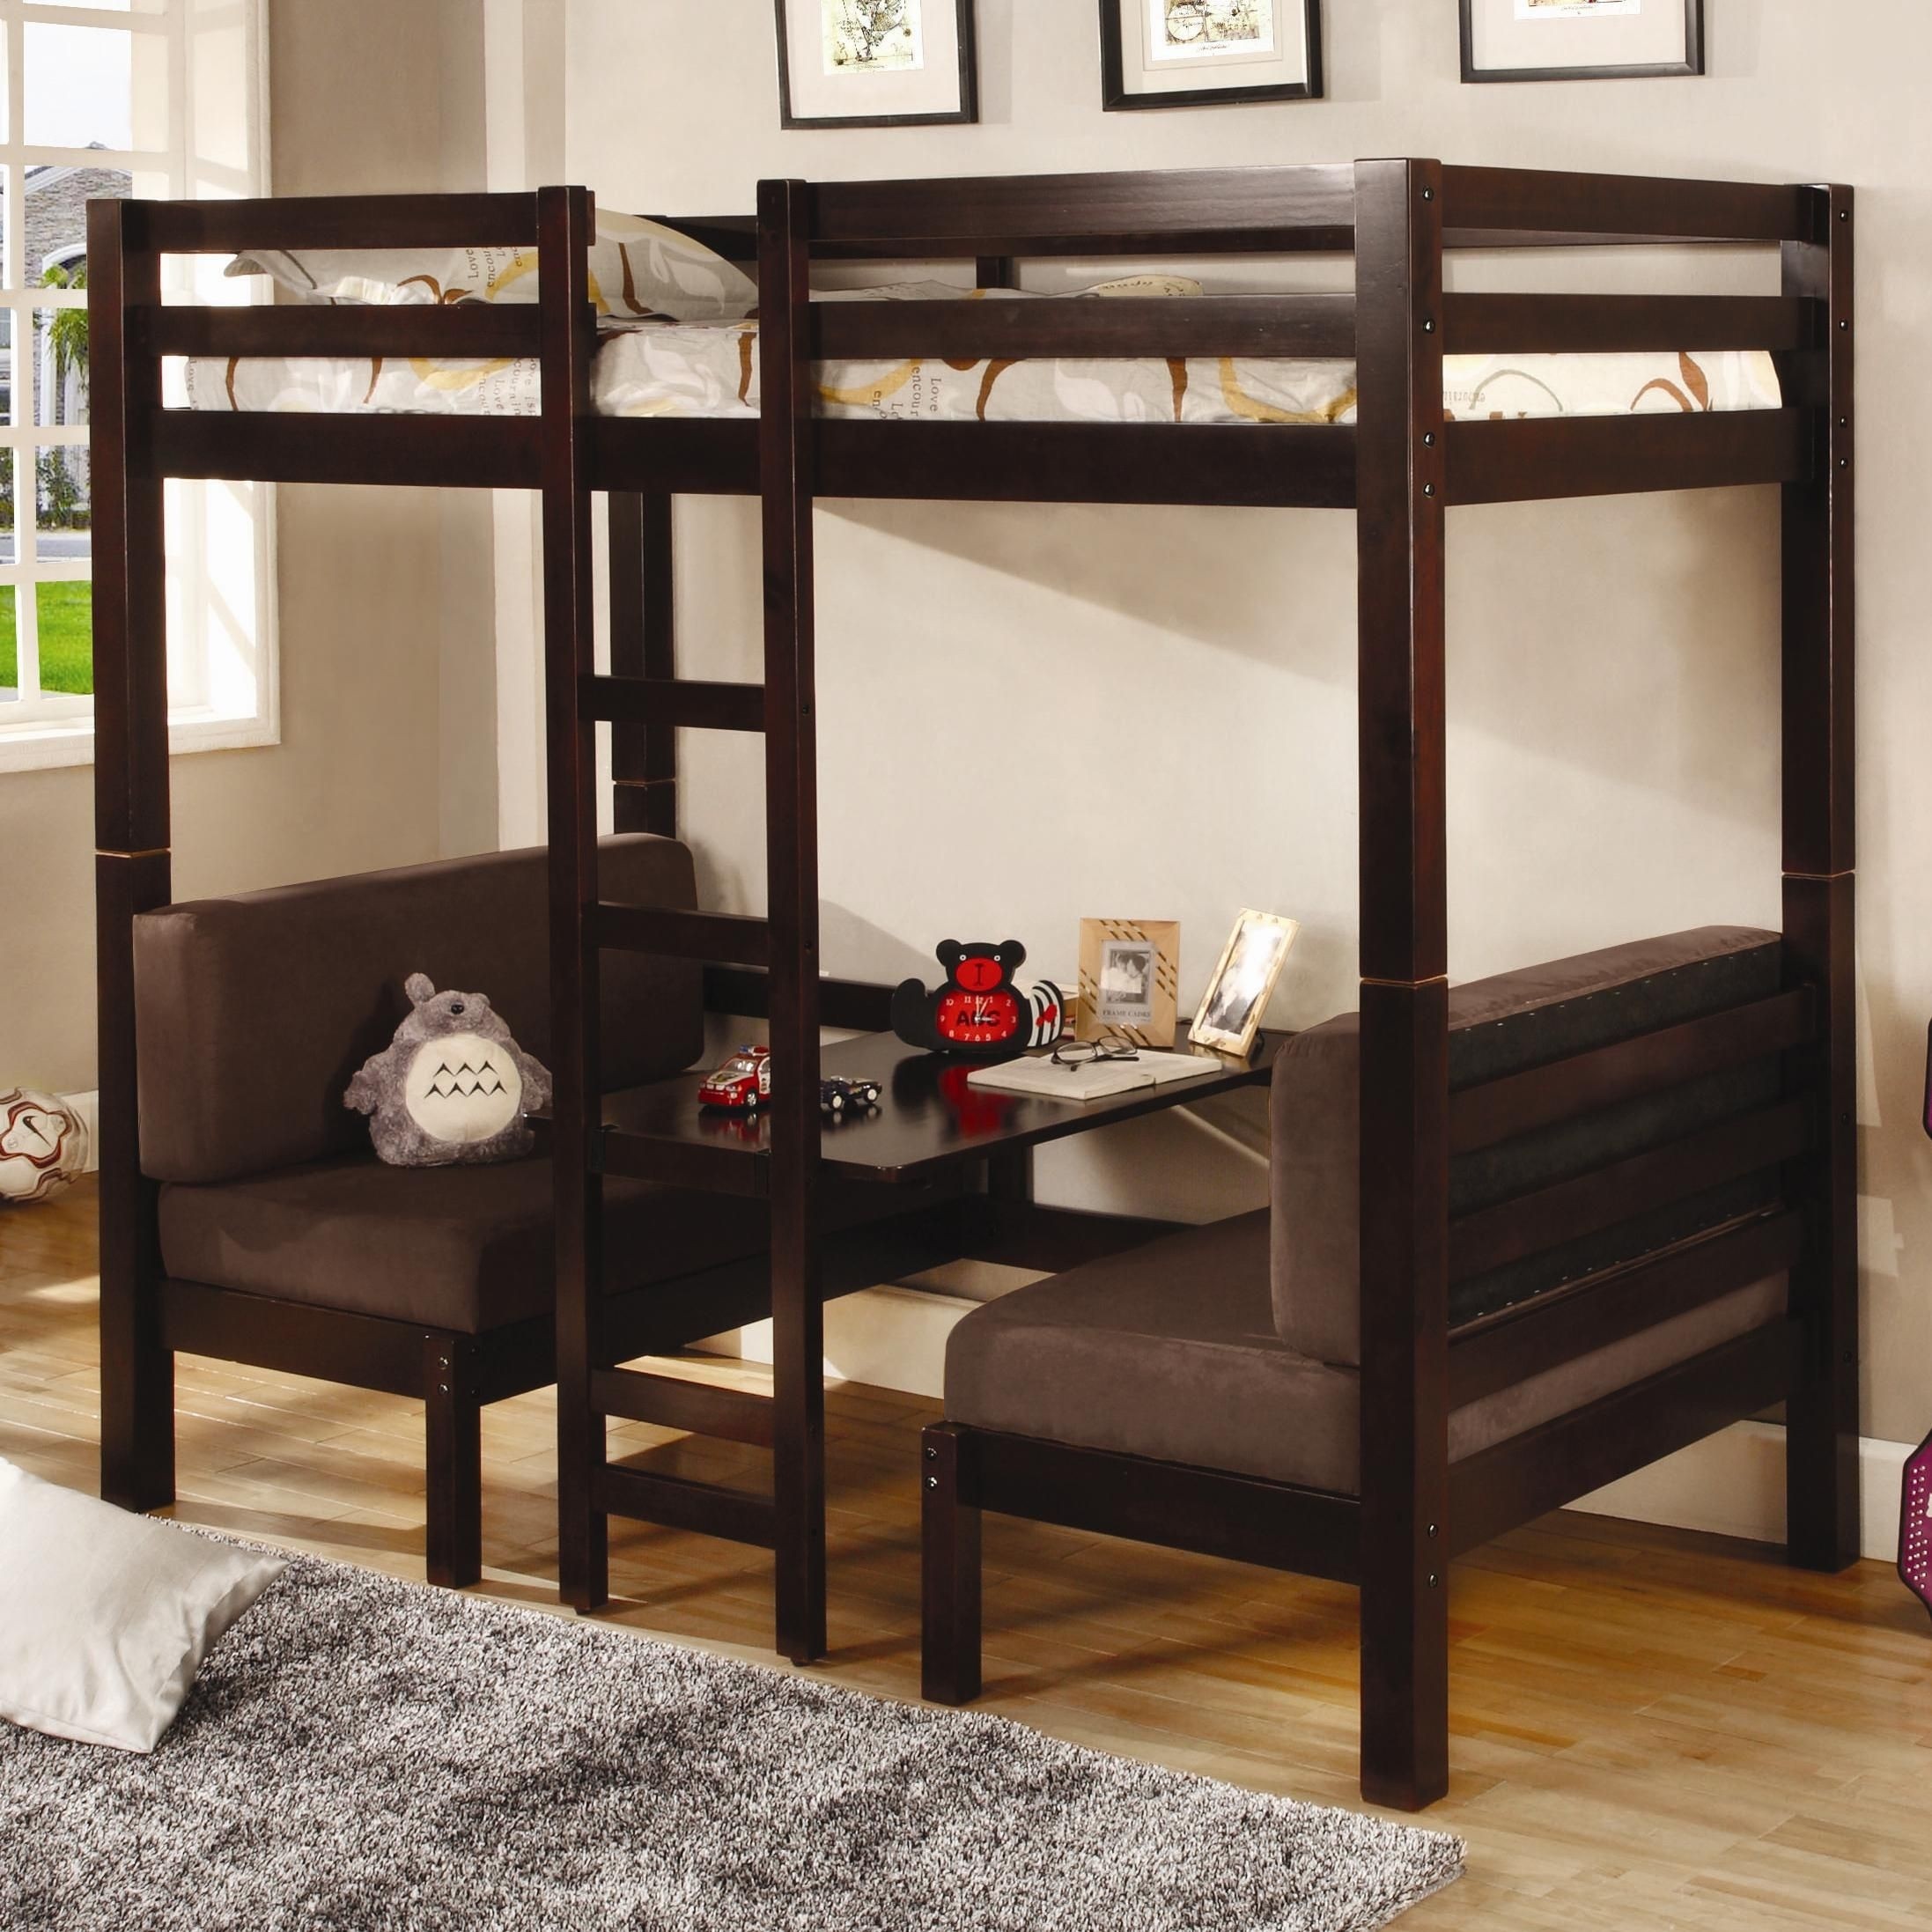 Bunk beds brown finish modern twin over twin convertible loft